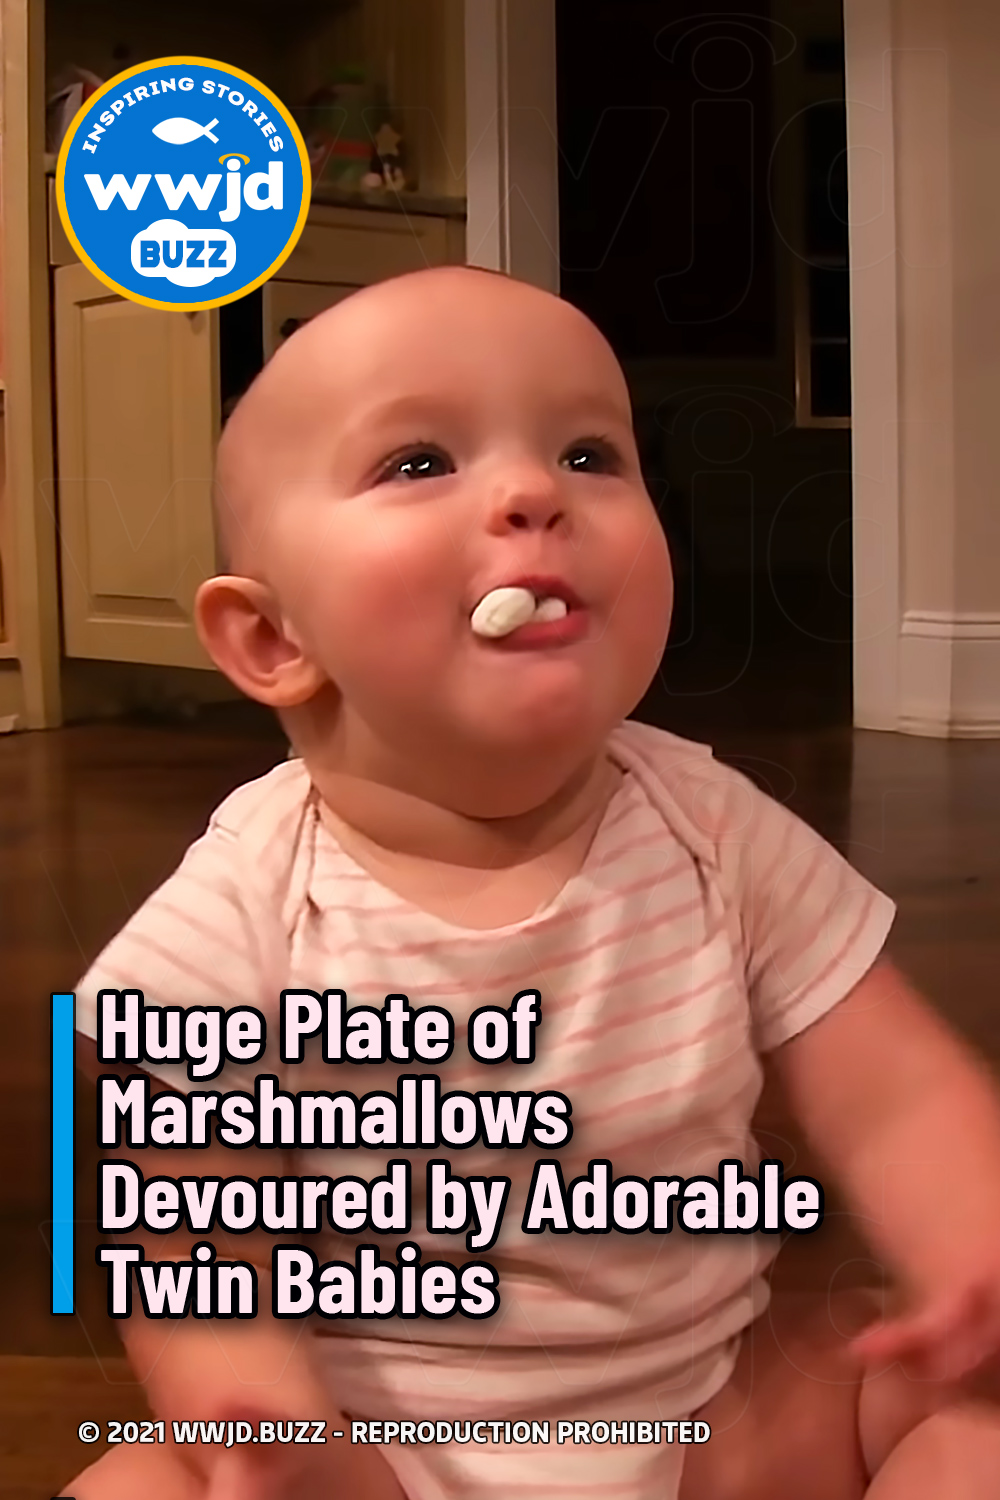 Huge Plate of Marshmallows Devoured by Adorable Twin Babies